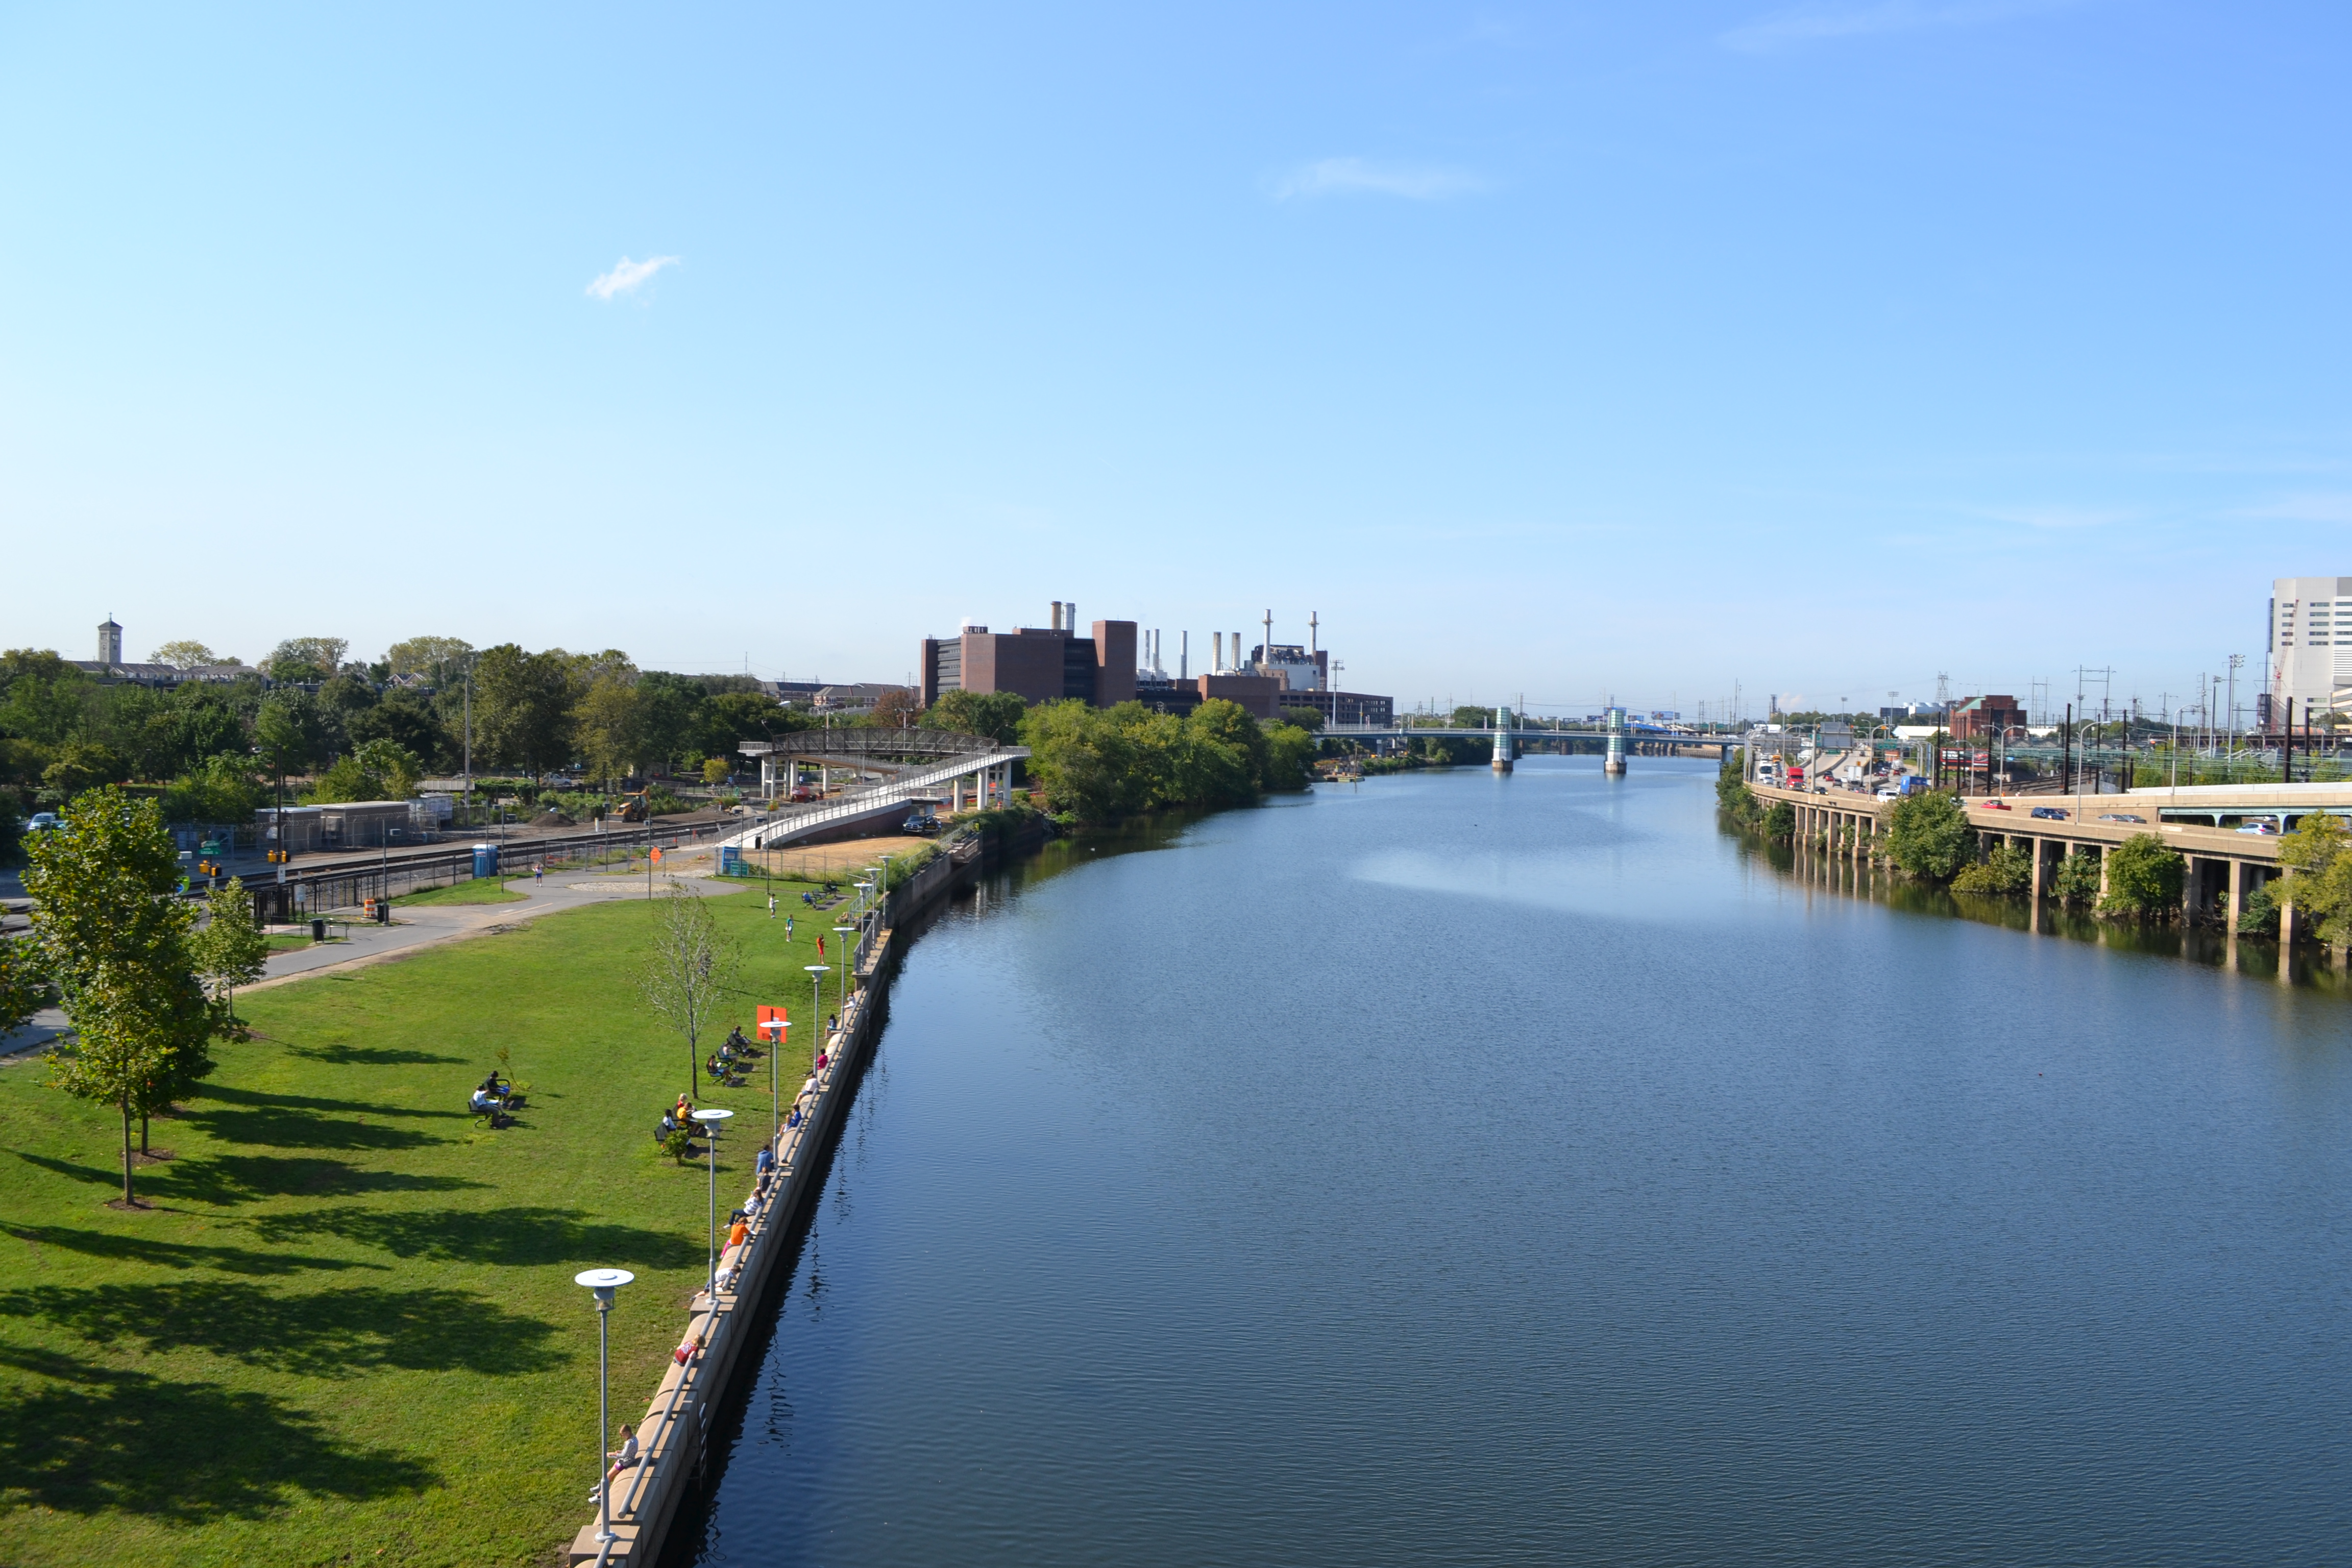 Work along the Schuylkill River will make an important section of the banks more accessible 